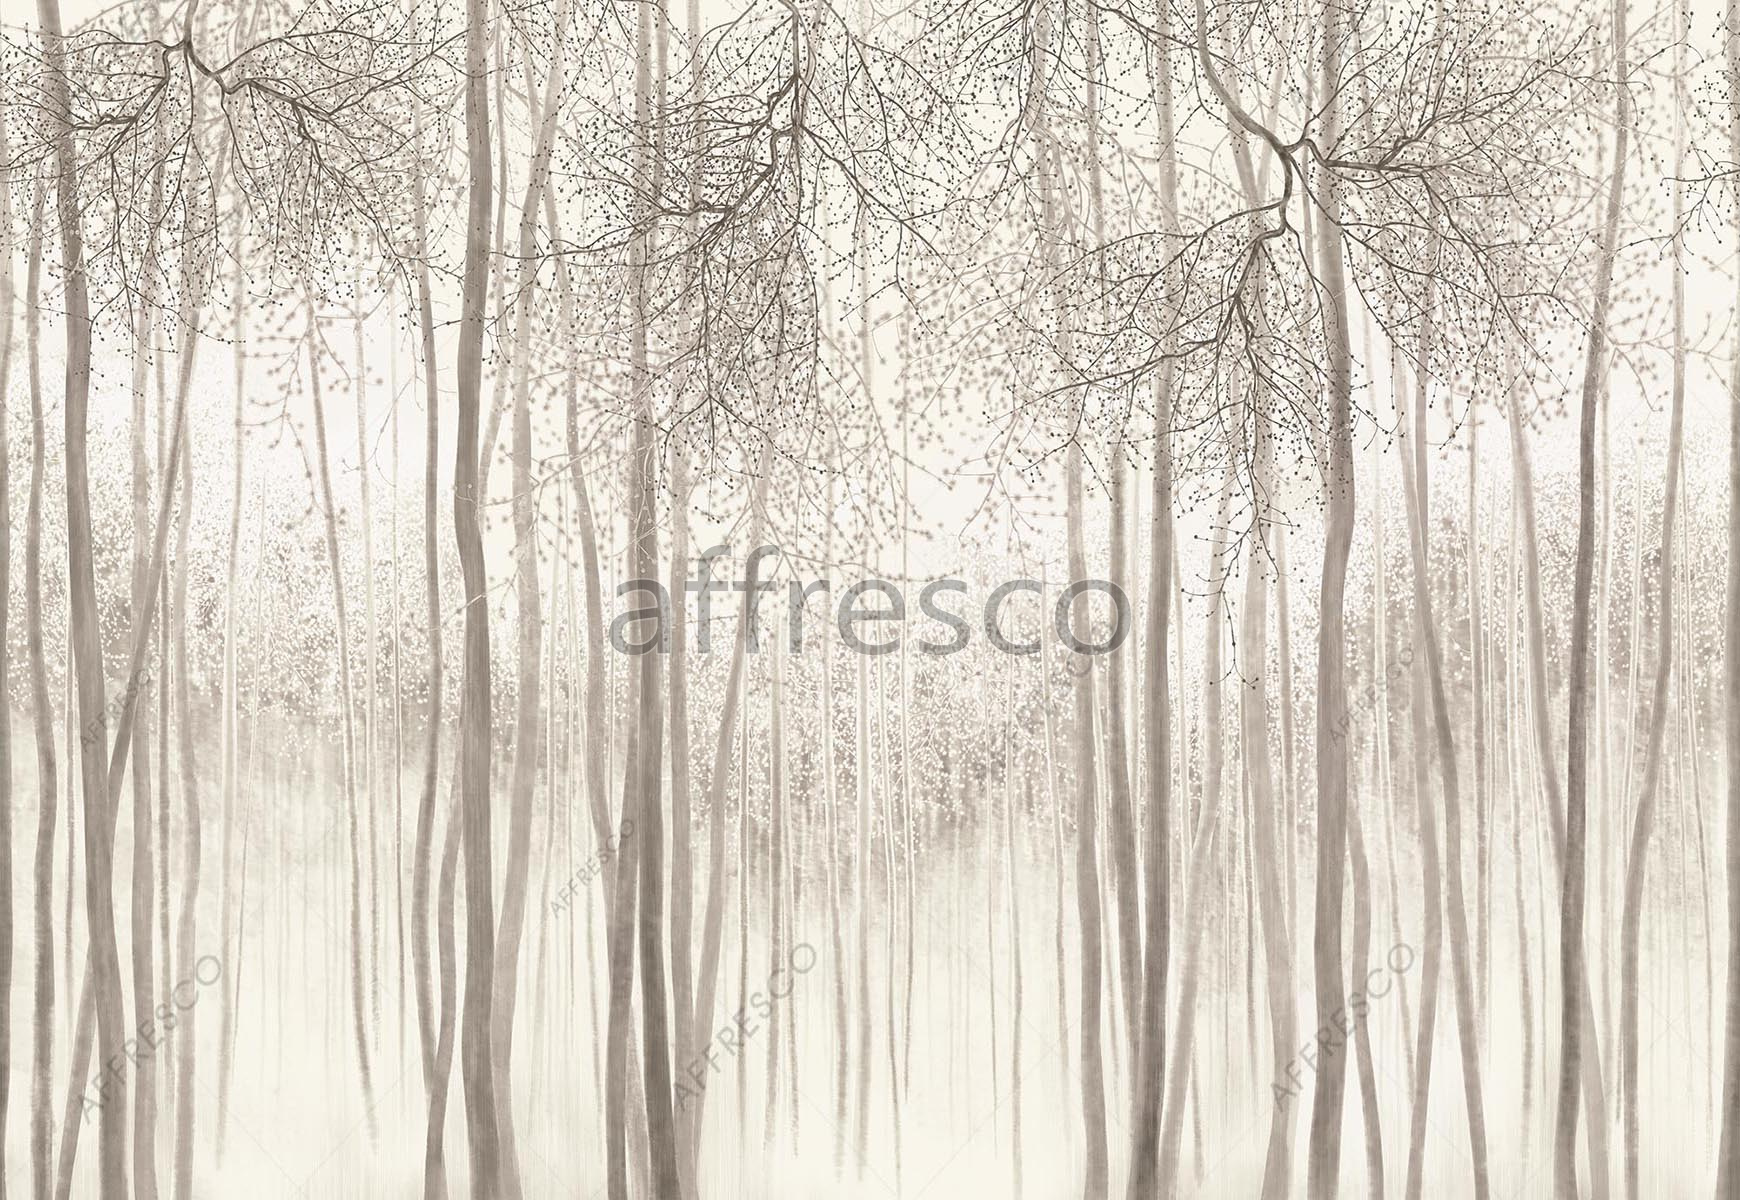 ID139259 | Forest | Charming forest | Affresco Factory